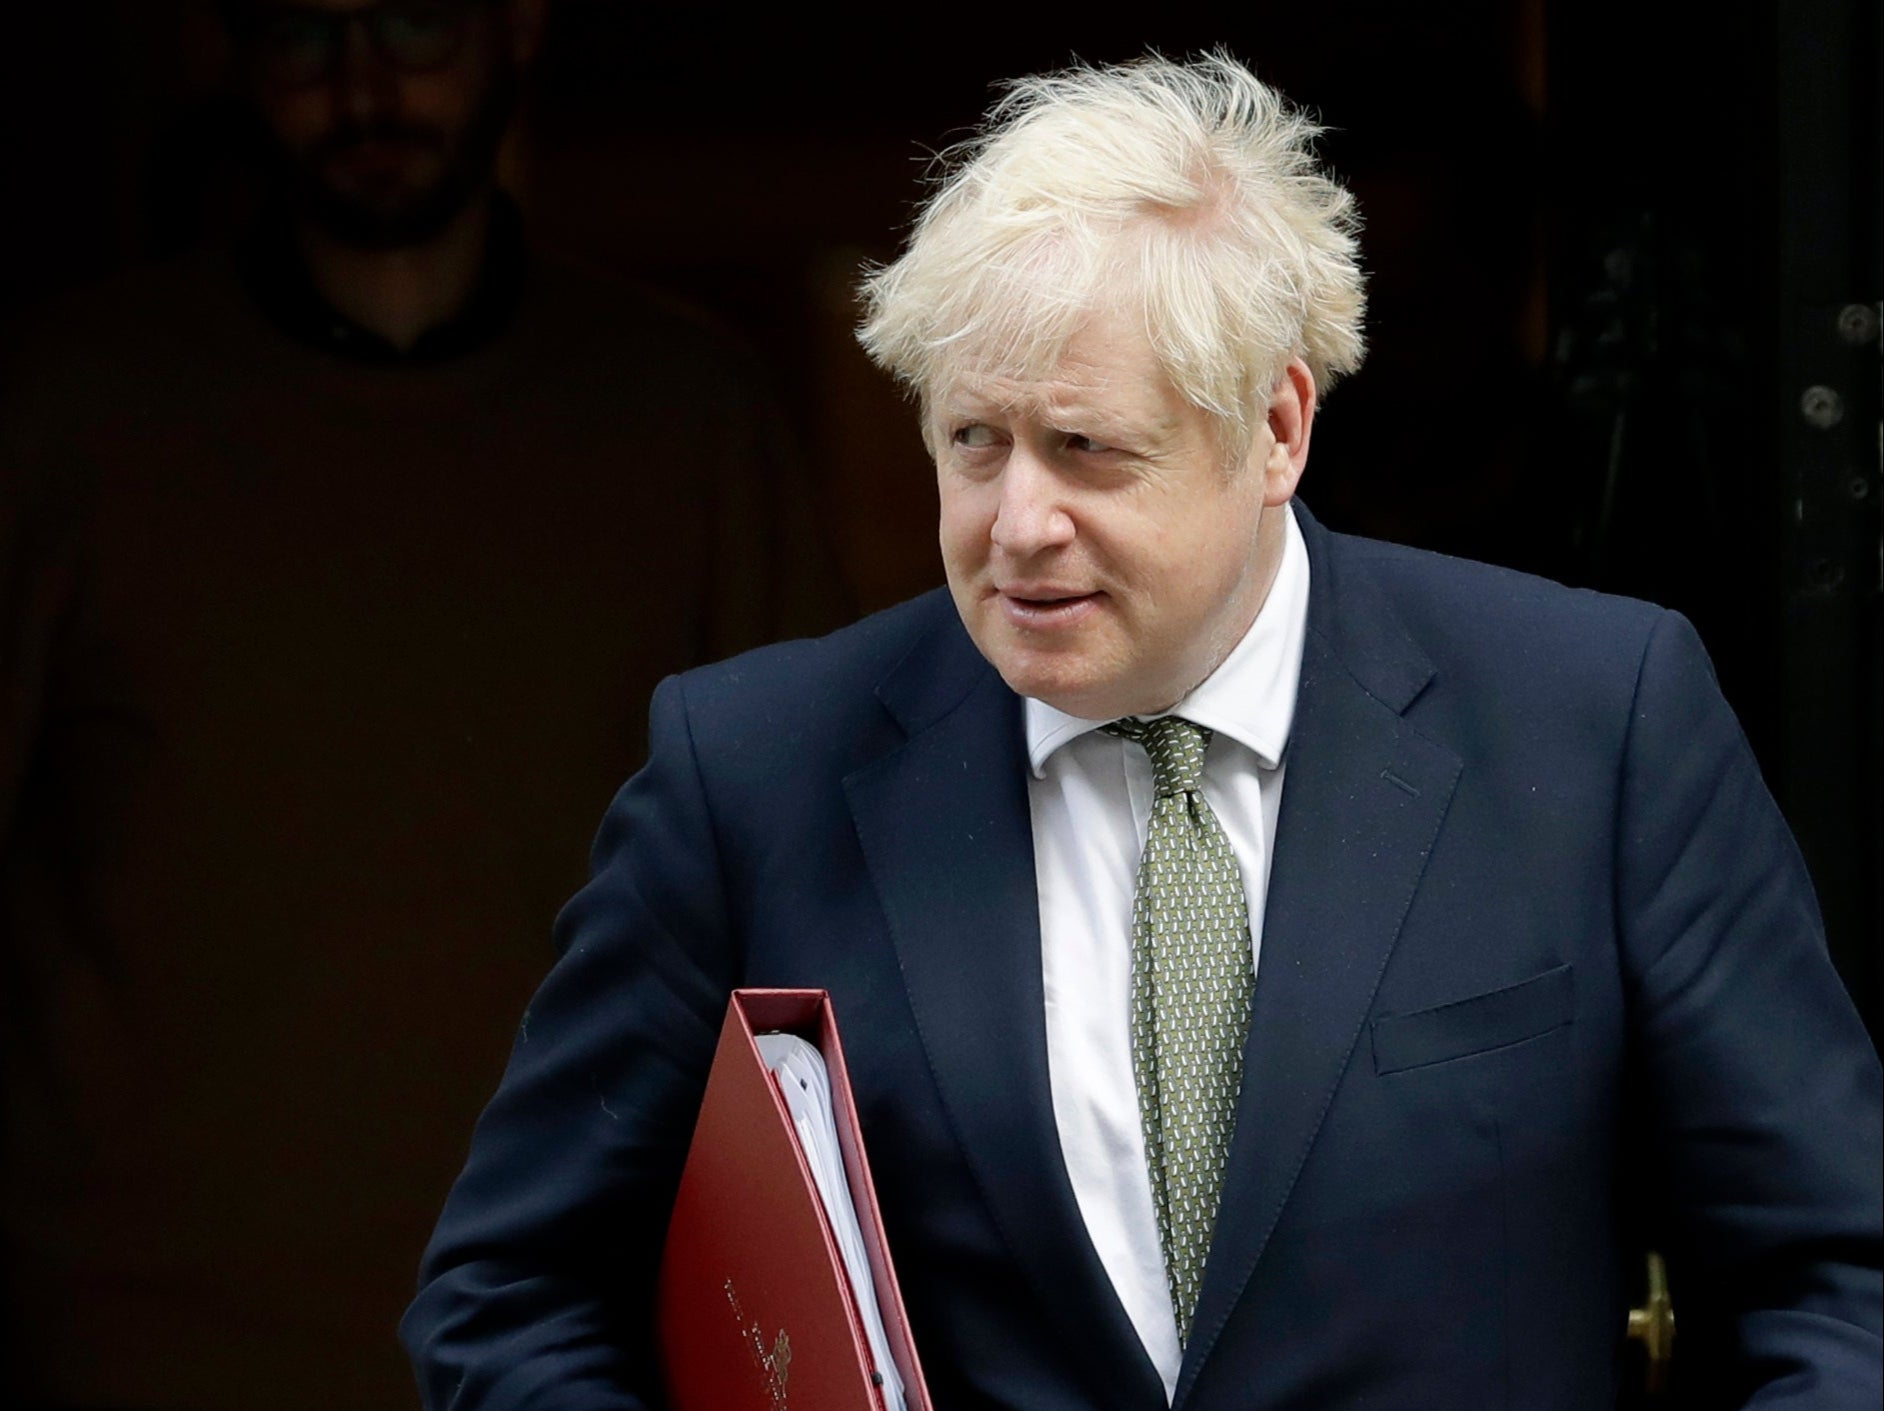 Boris Johnson dismissed concerns about Russian interference in elections as the moaning of 'Islington remainers'